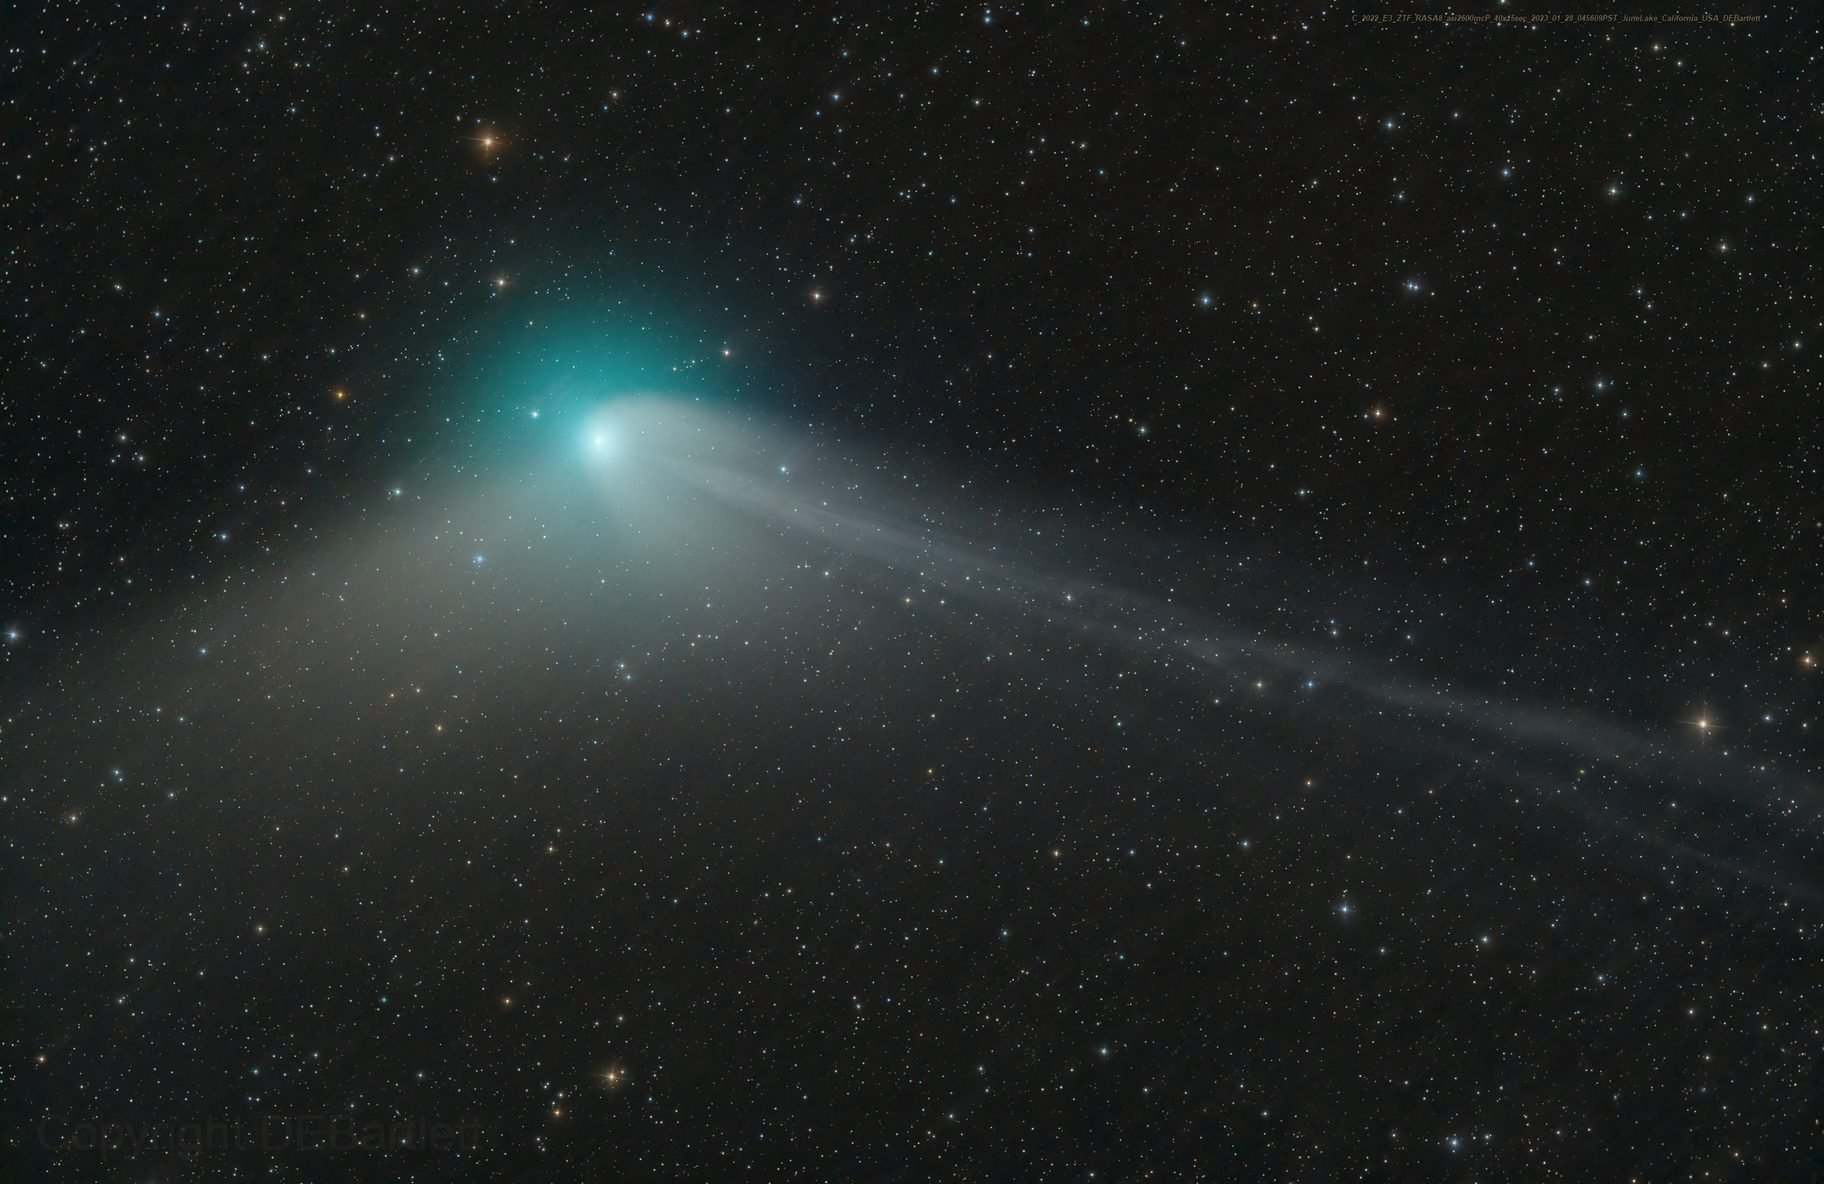 EXPLAINER: What to expect during the green comet’s encounter with Earth